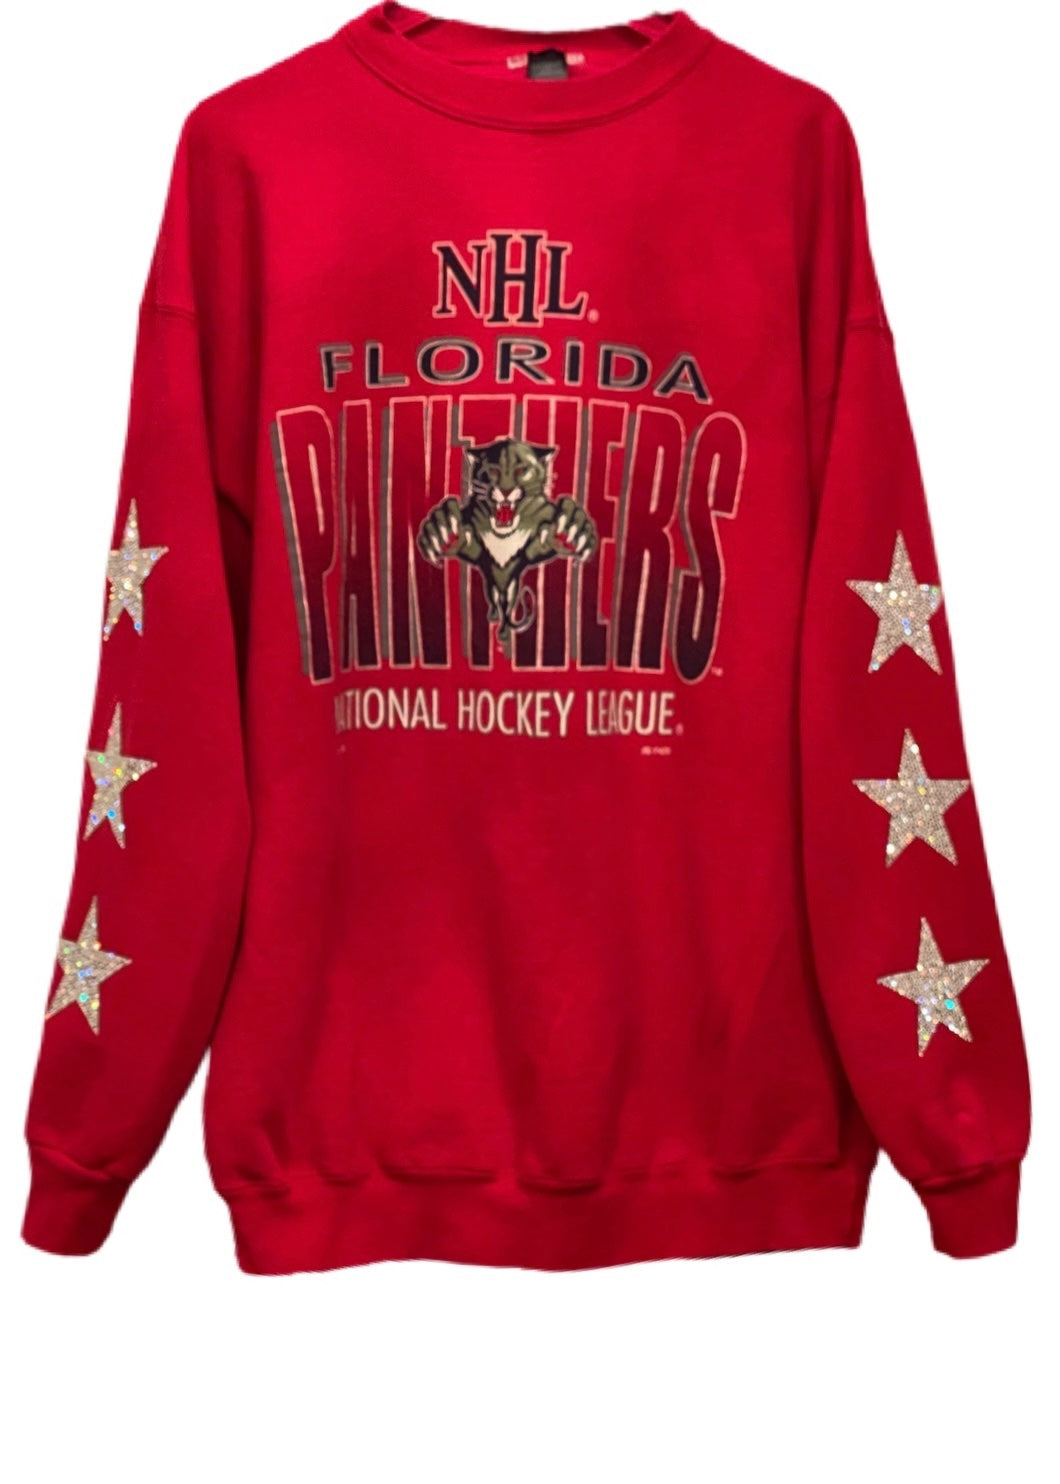 Florida Panthers, NHL One of a KIND Vintage Sweatshirt with Crystal Star Design with Custom Crystal Number